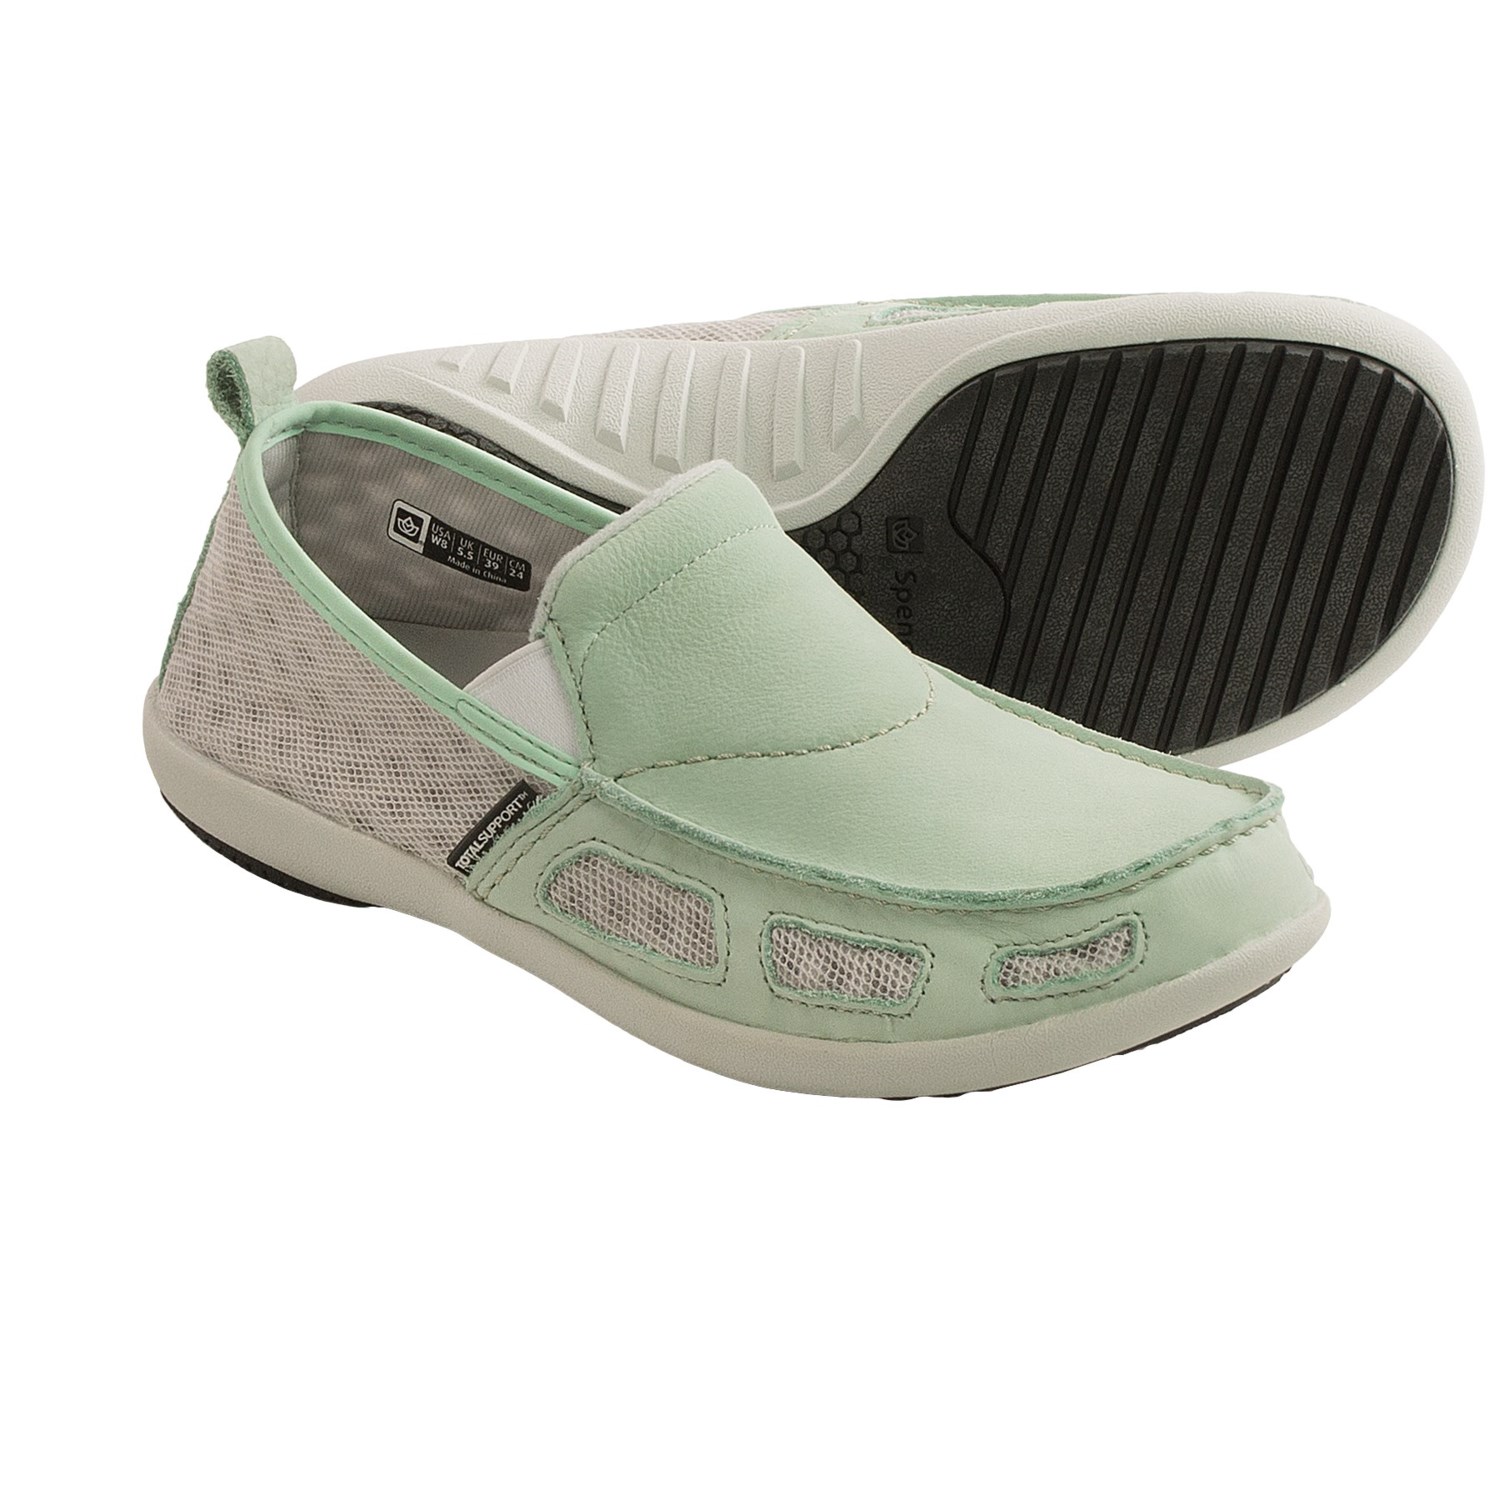 Spenco Siesta Shoes (For Women) 9480M - Save 75%